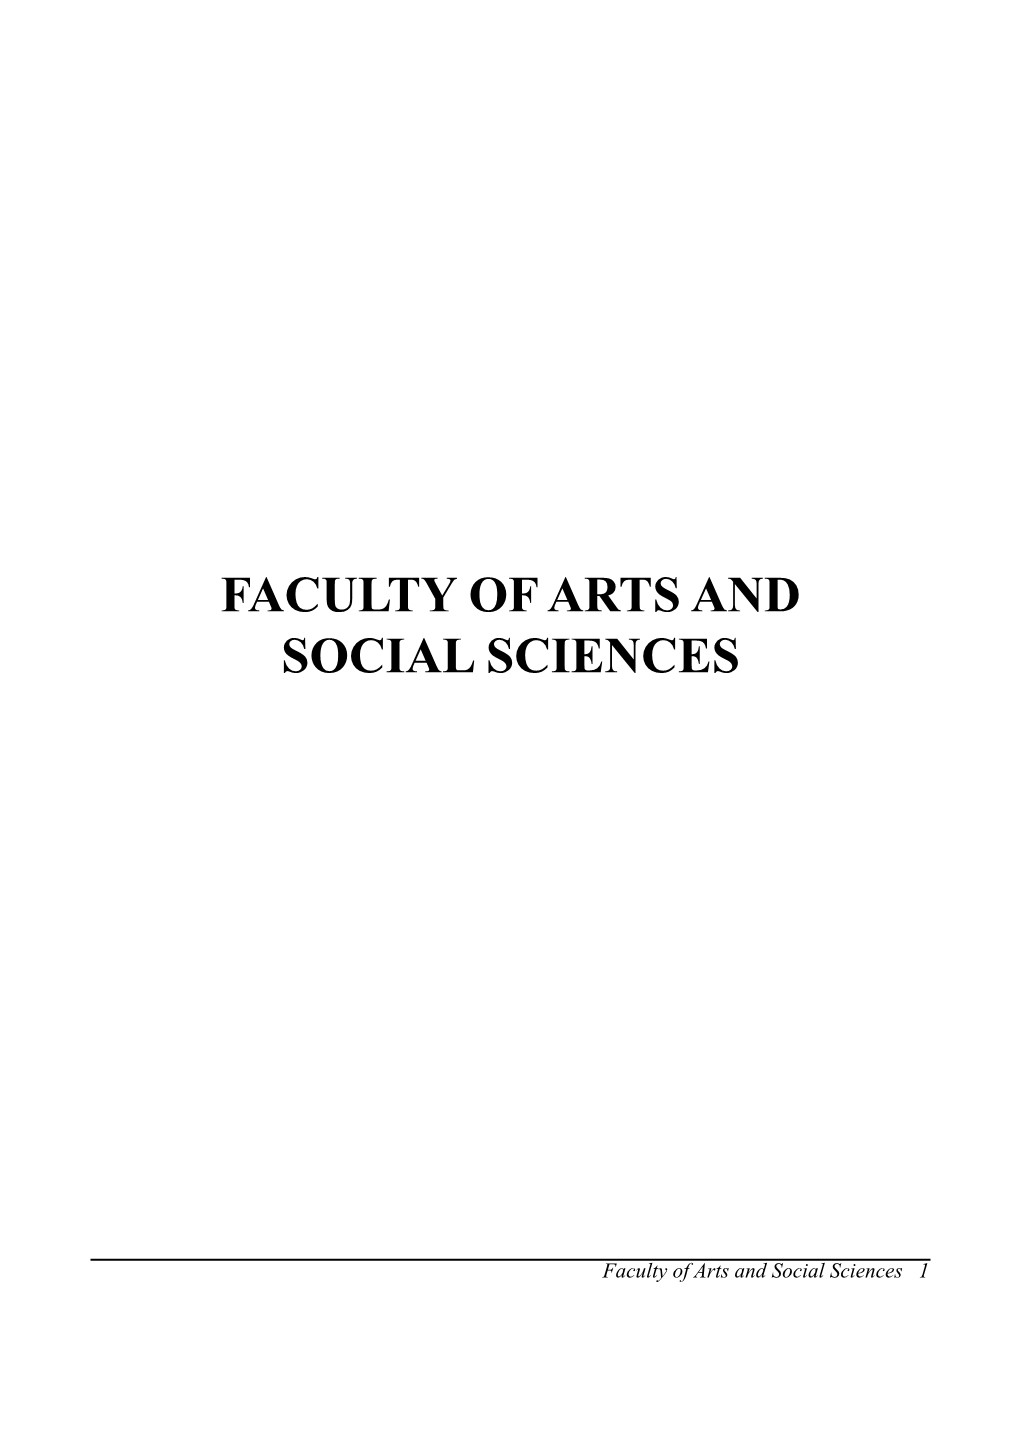 Faculty of Arts and Social Sciences